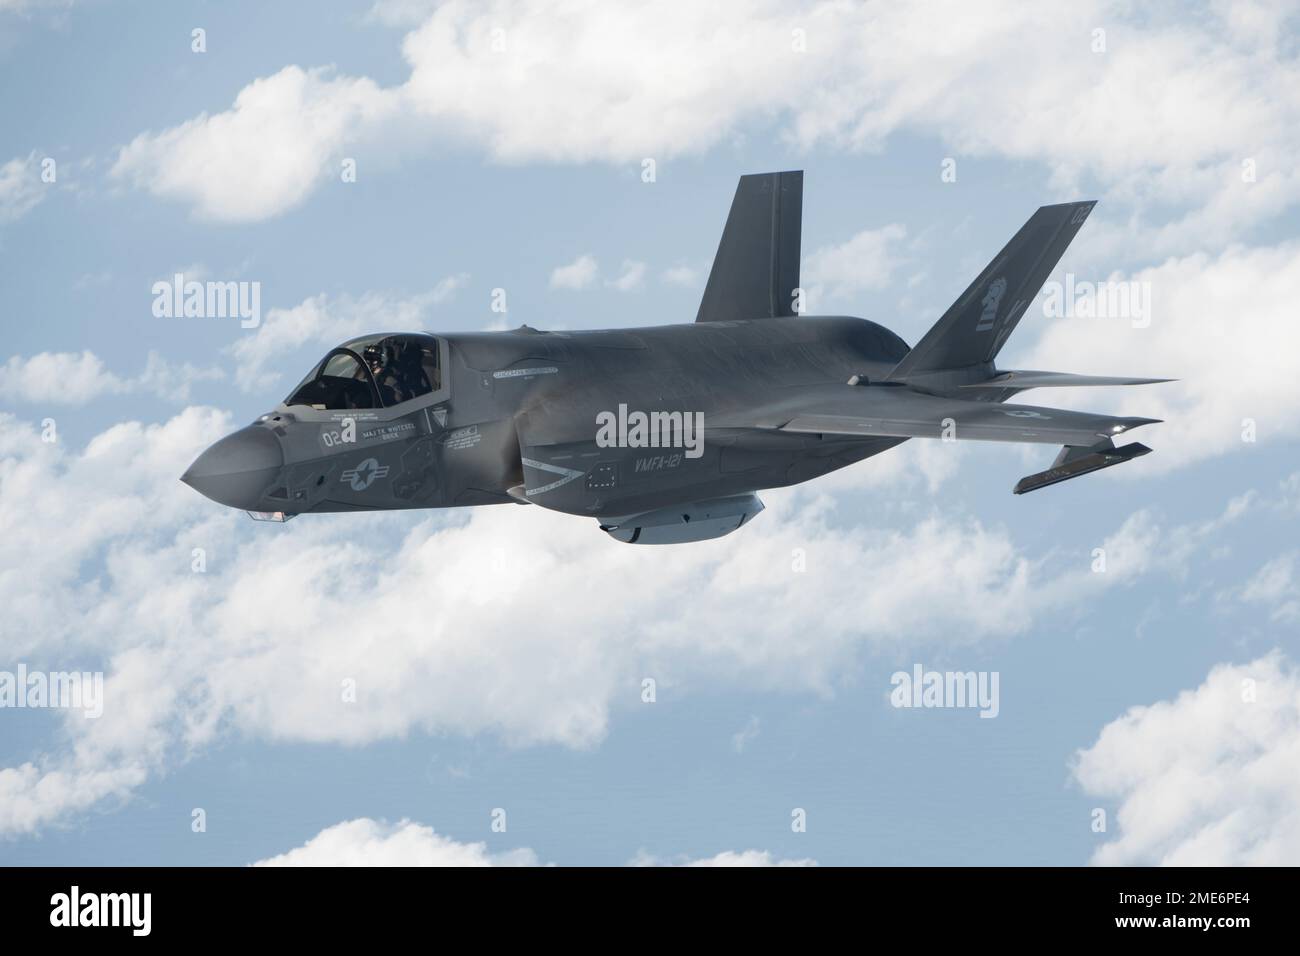 Pacific Ocean, United States. 19 January, 2023. A U.S. Marine Corps F-35B Lightning II stealth fighter aircraft with the Green Knights of Marine Fighter Attack Squadron 121, approaches an Air Force KC-135 Stratotanker to refuel during routine operations, January 19, 2023 over the Pacific Ocean.  Credit: A1C Tylir Meyer/U.S. Air Force/Alamy Live News Stock Photo